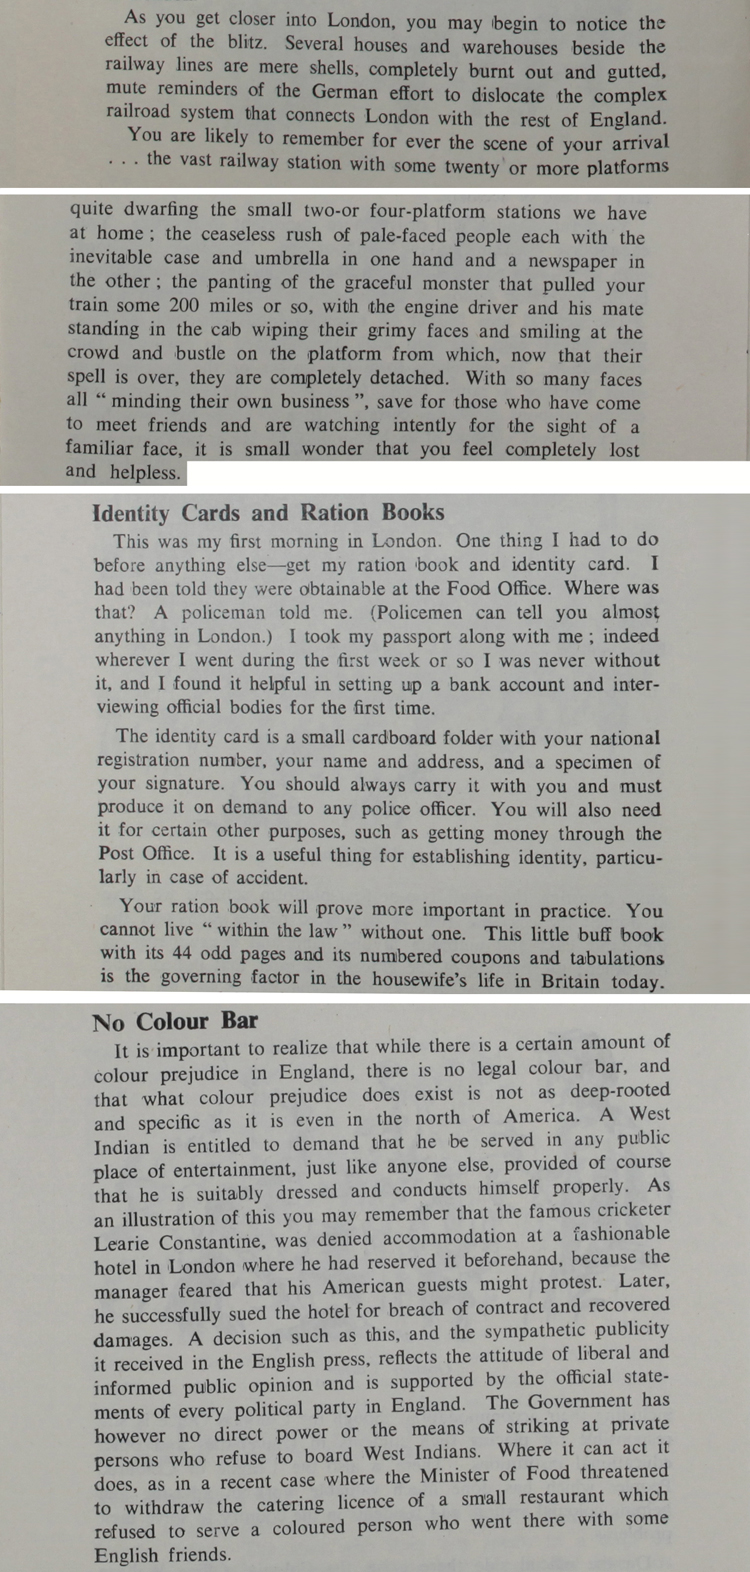 Extracts from a booklet produced in July 1950 by the Central Office of Information called "A West Indian in England" (CO 875/59/1)